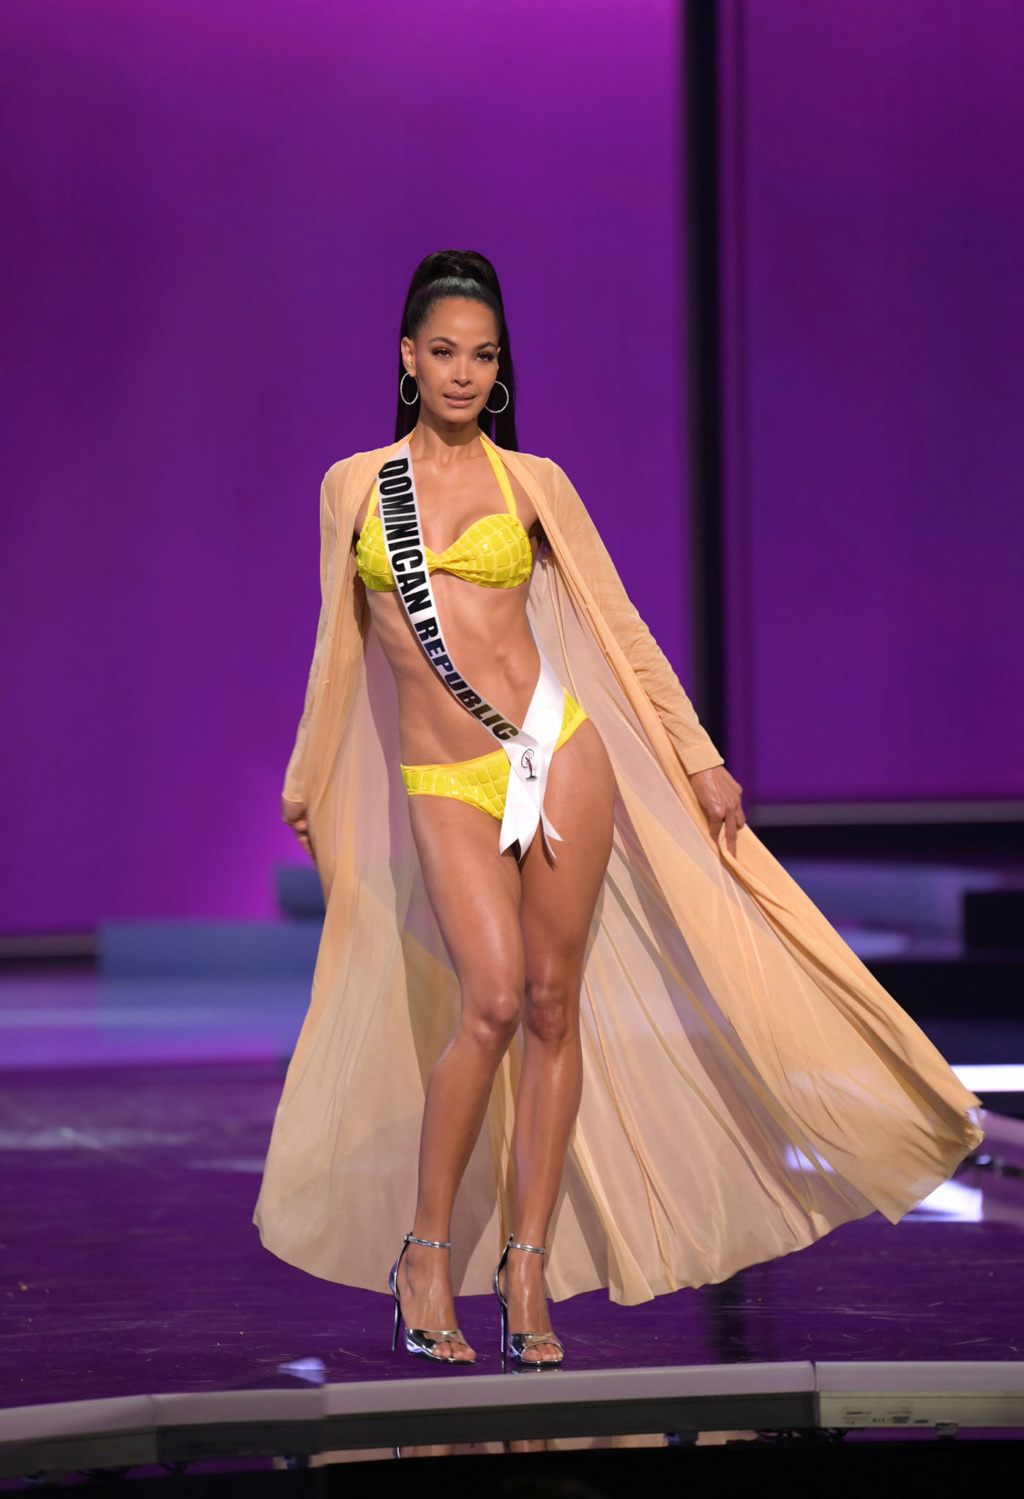 MISS UNIVERSE 2020 - PRELIMINARY COMPETITION 2229